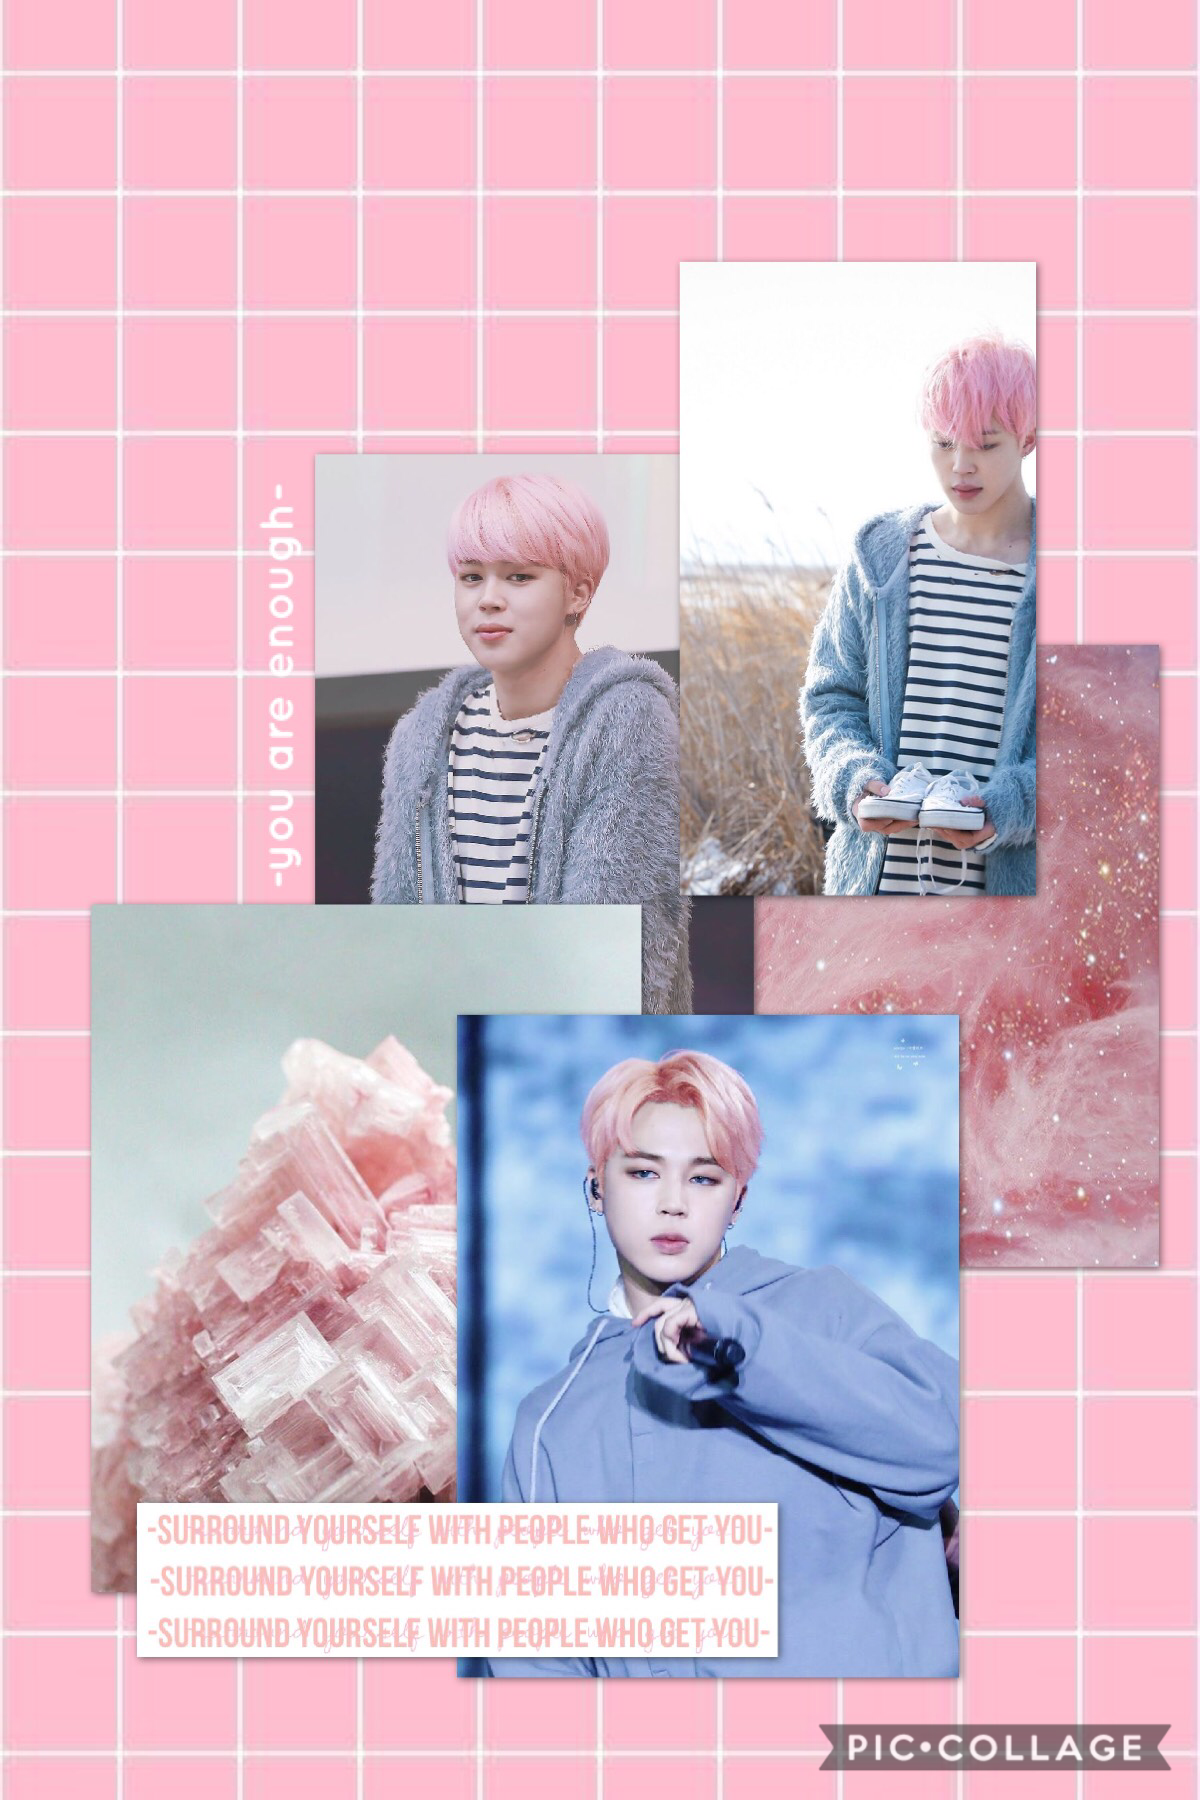 My friend says she loves this but I’m not sure, is it ok? This is the fluffy/light Jimin edit I did!